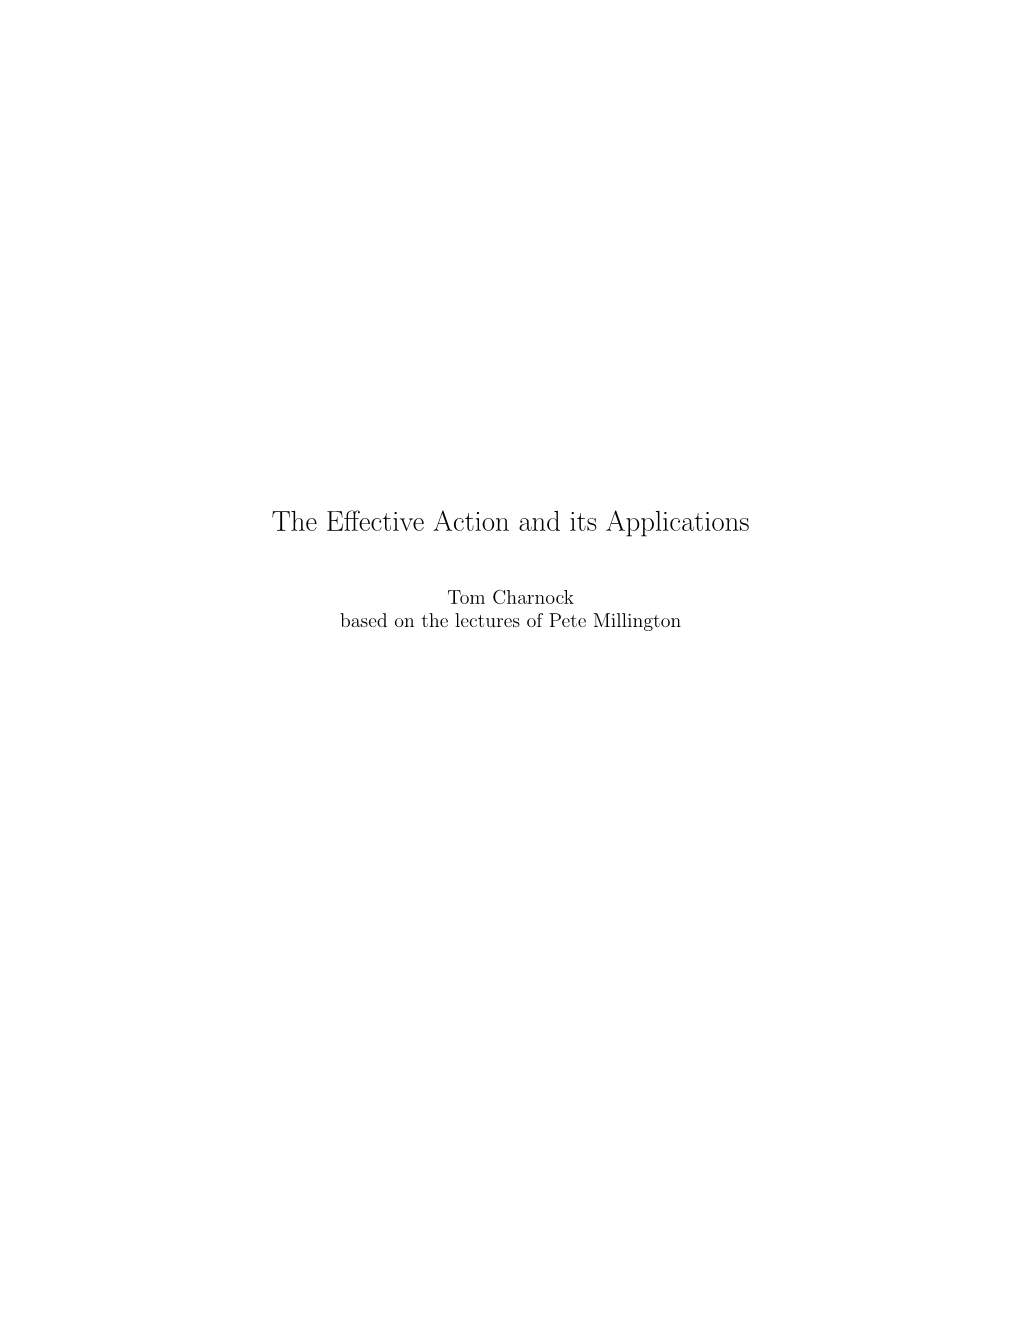 The Effective Action and Its Applications